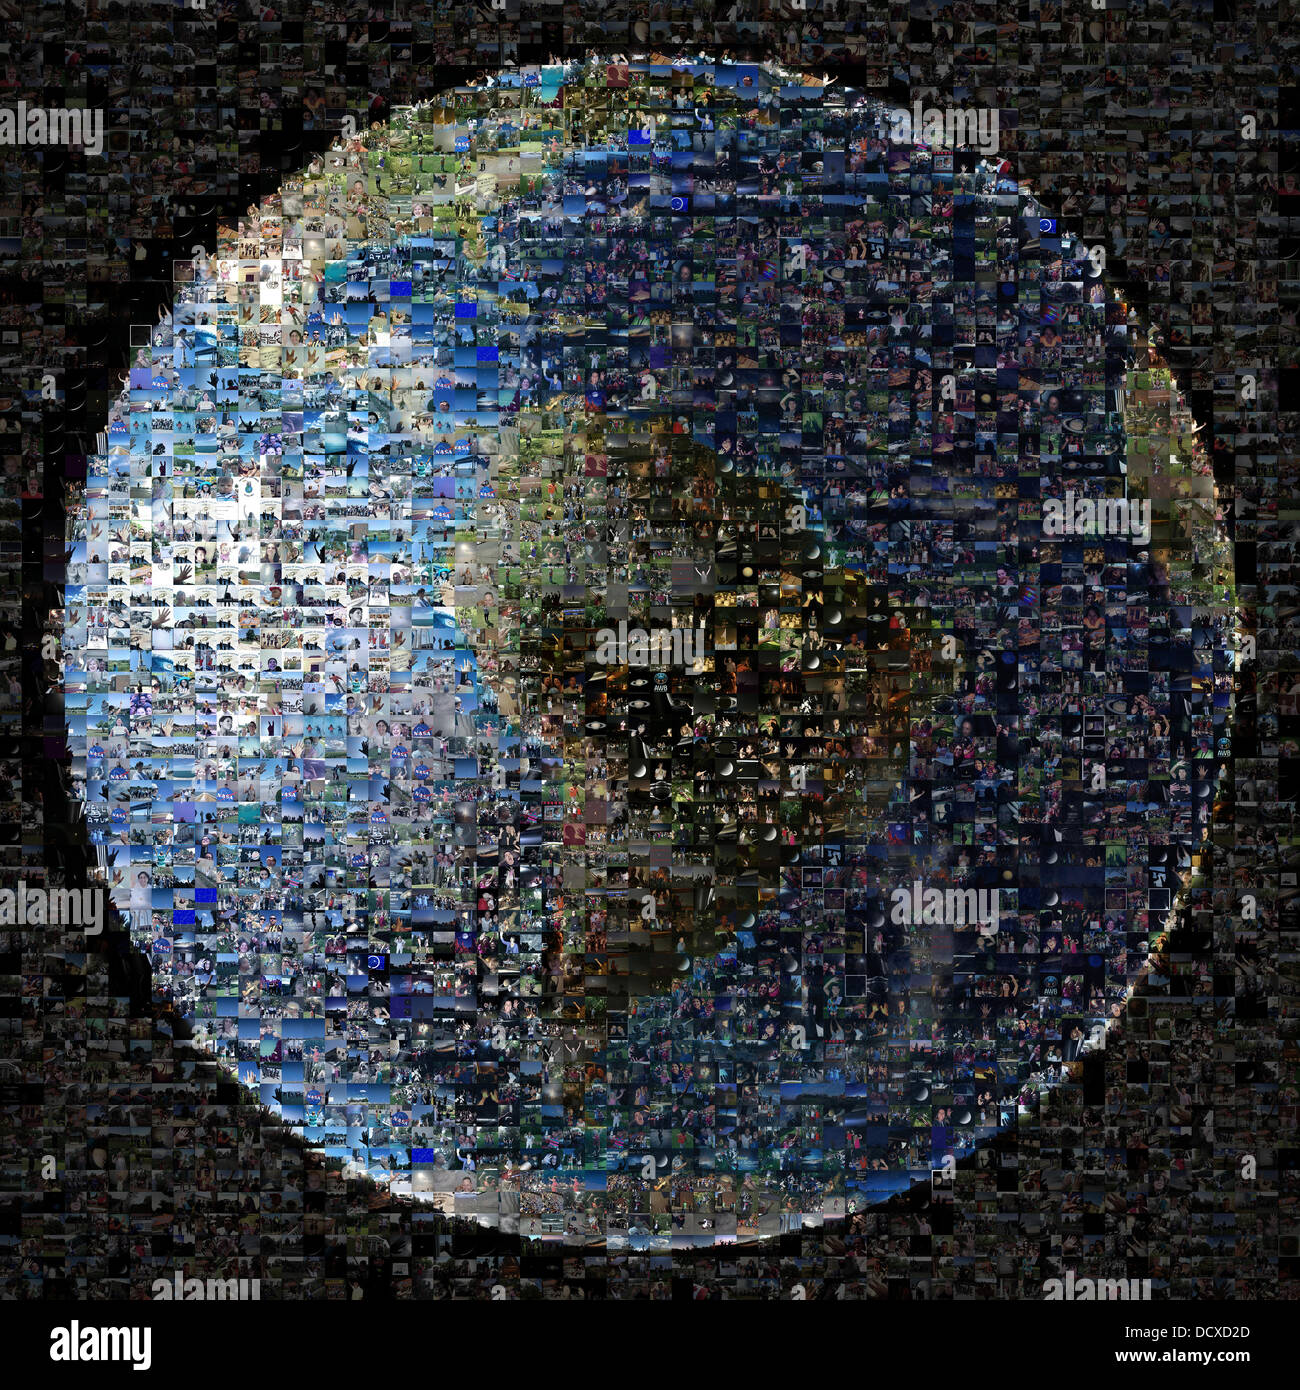 A composite of 1400 images from more than 40 countries and 30 US states of themselves as part of the Wave at Saturn event organized by NASA's Cassini mission August 22, 2013. That event held on July 19, 2013, marked the day the Cassini spacecraft turned back toward Earth to take our picture as part of a larger mosaic of the Saturn system. Stock Photo